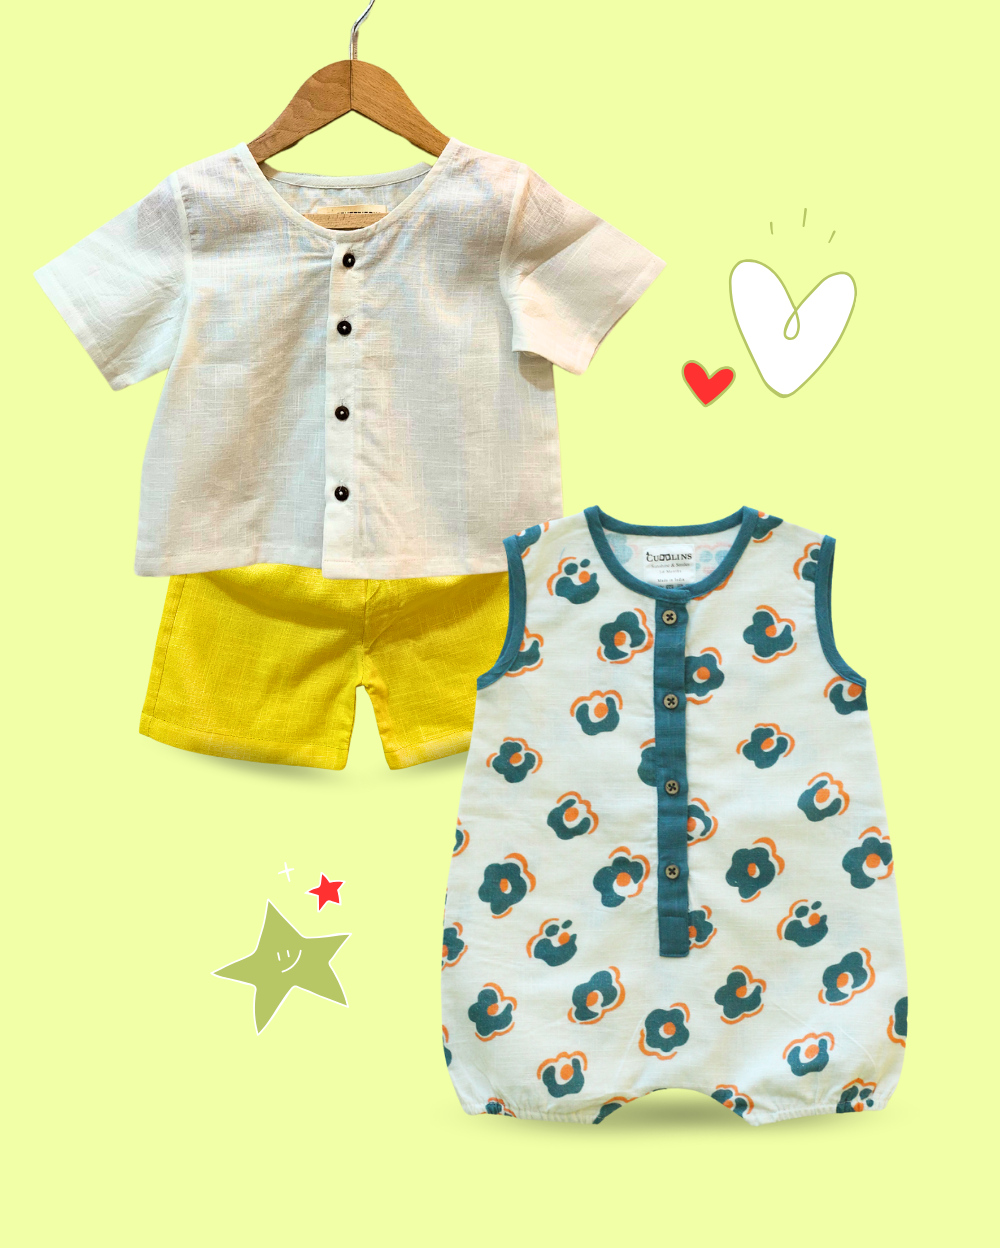 100% Organic Cotton Onesies & Baby Clothes